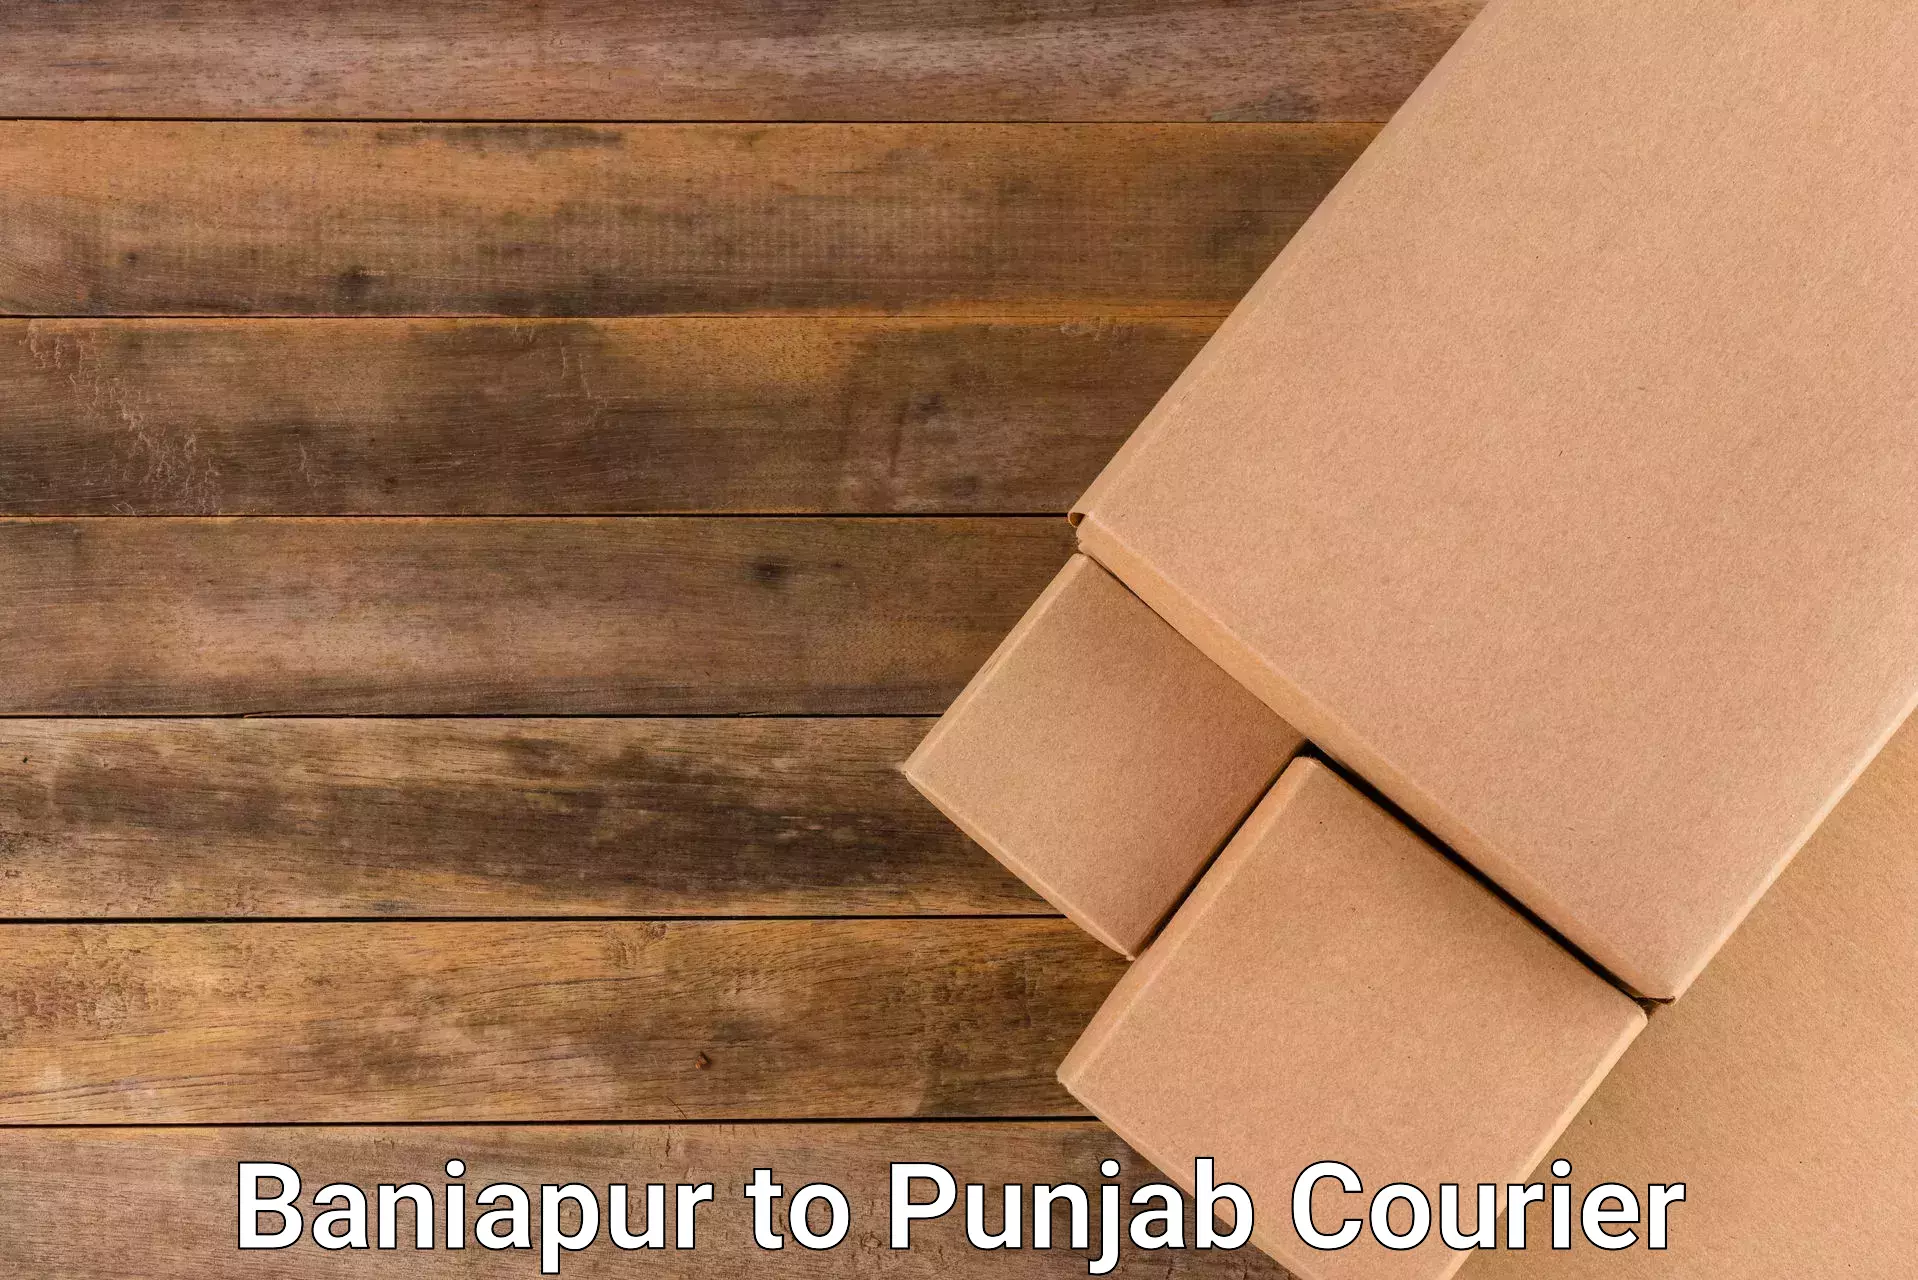 Cash on delivery service Baniapur to Punjab